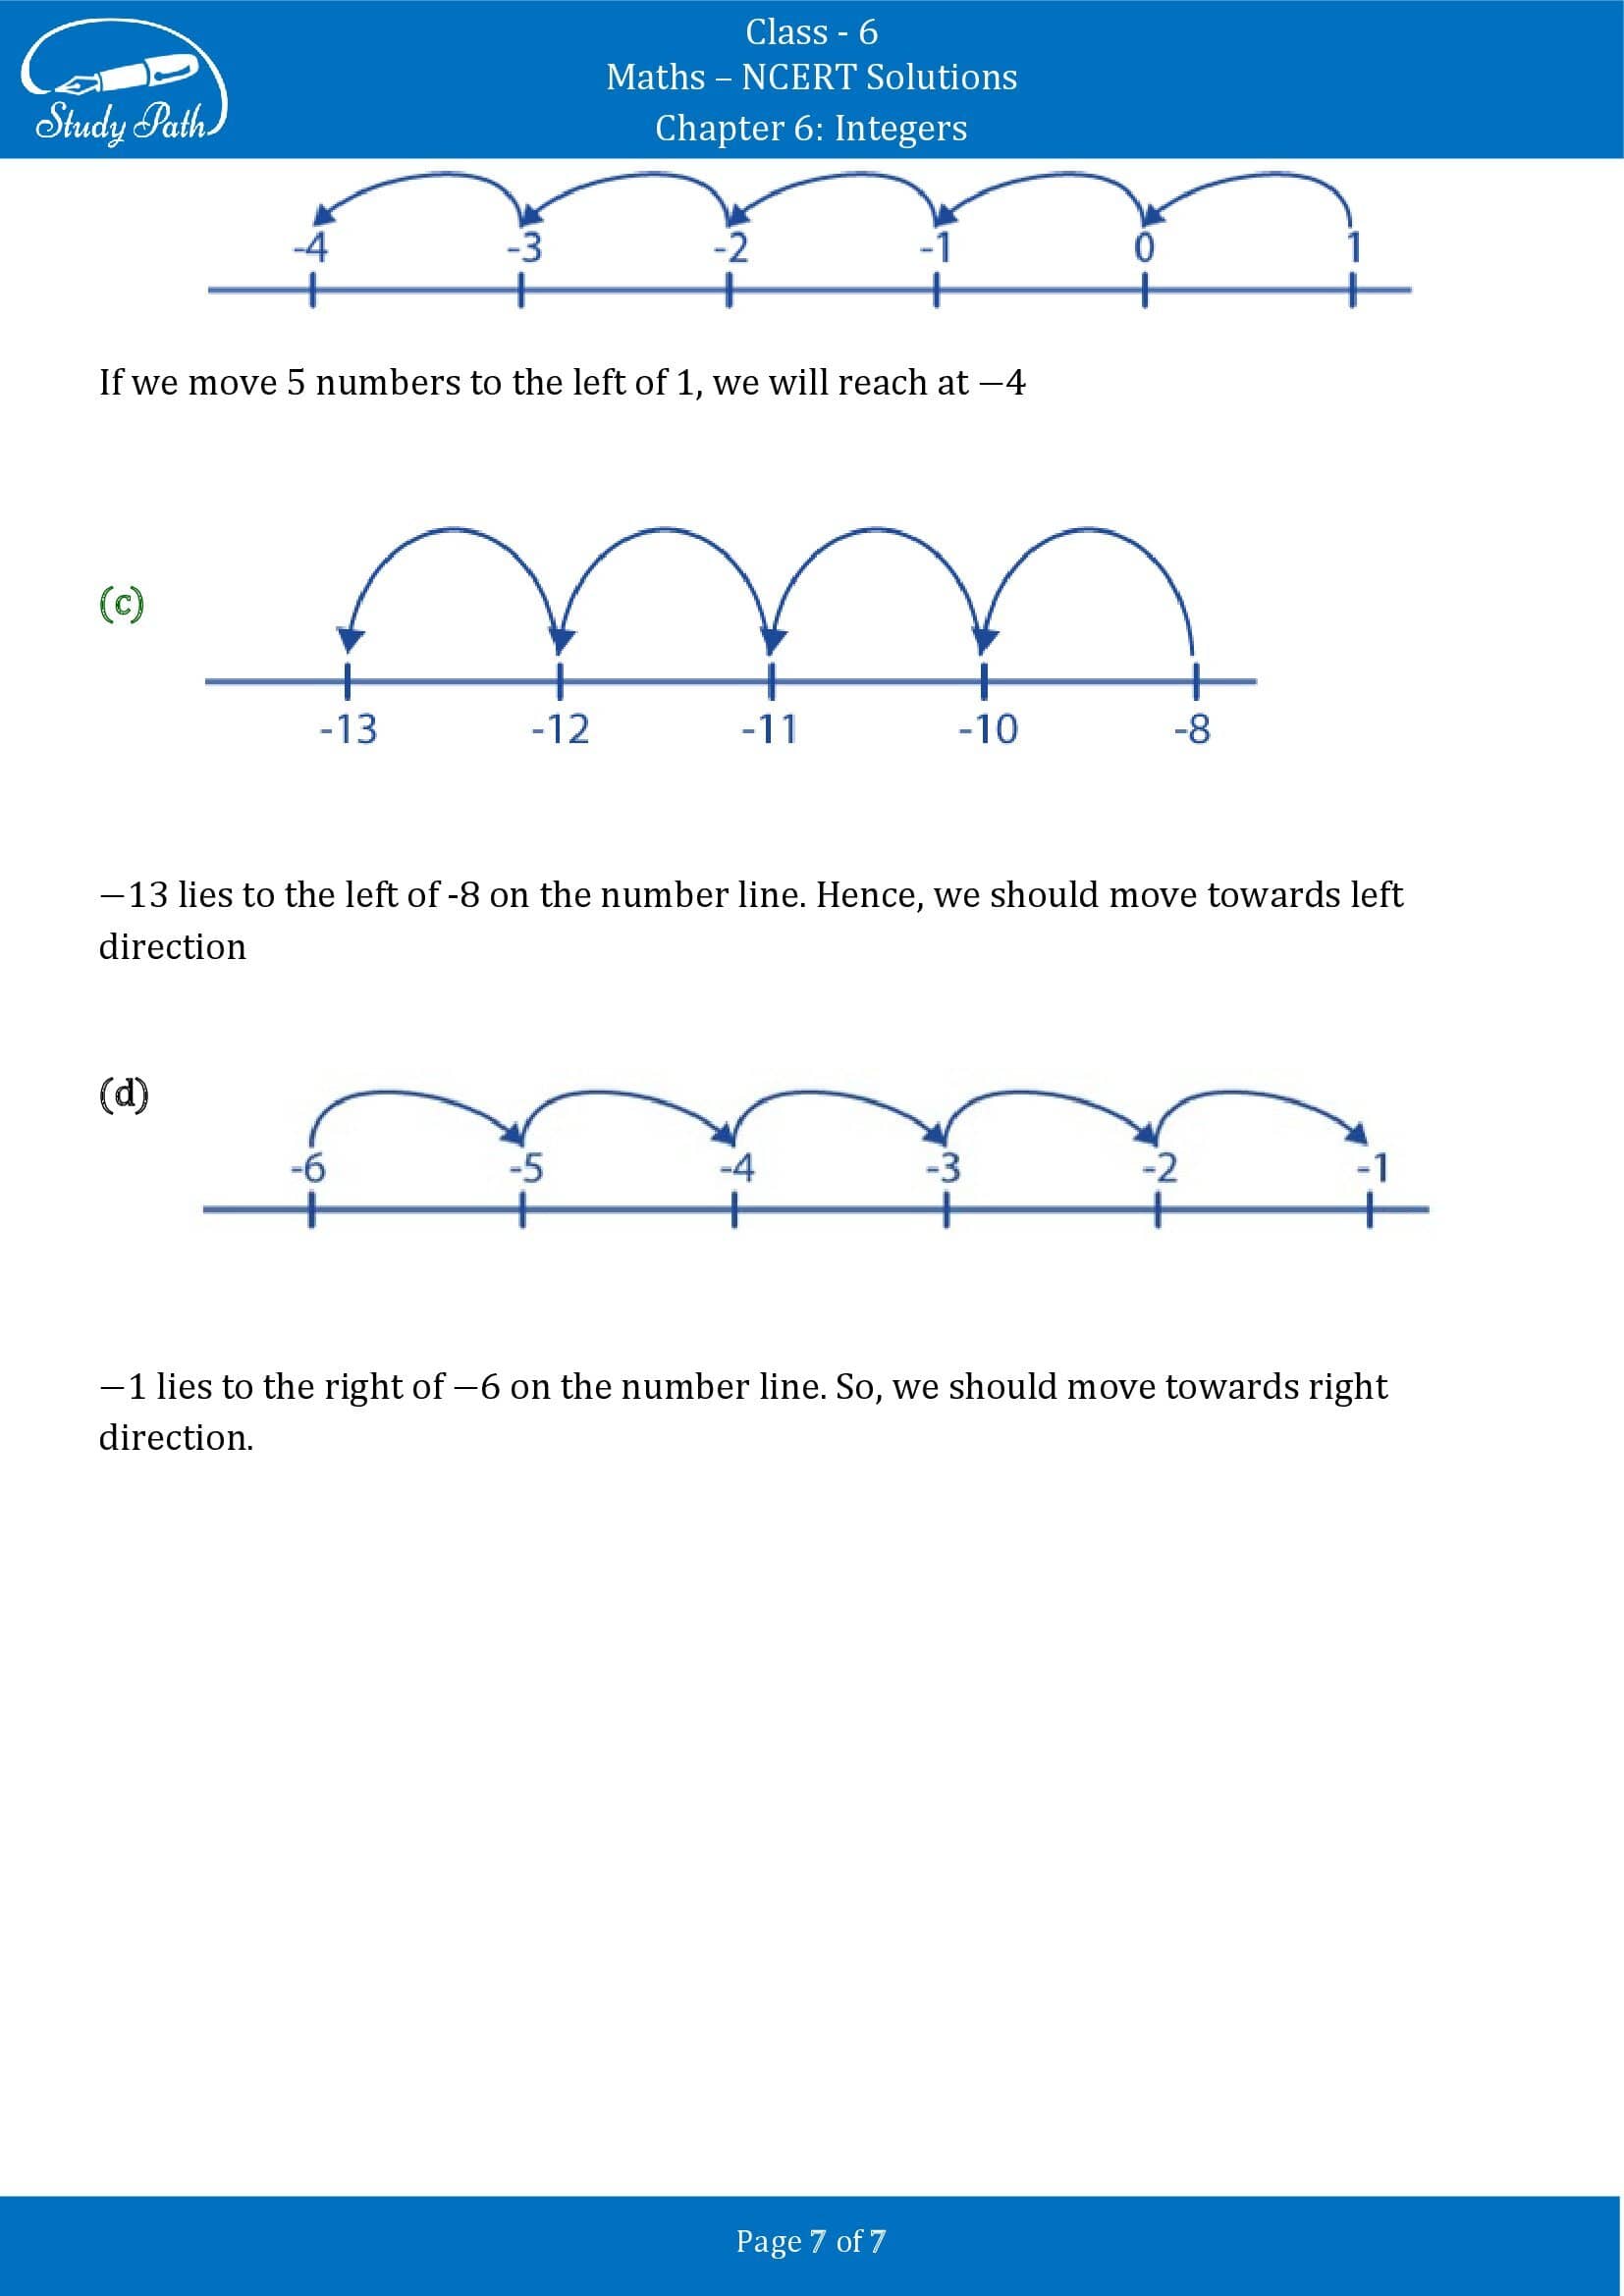 NCERT Solutions for Class 6 Maths Chapter 6 Integers Exercise 6.1 00007